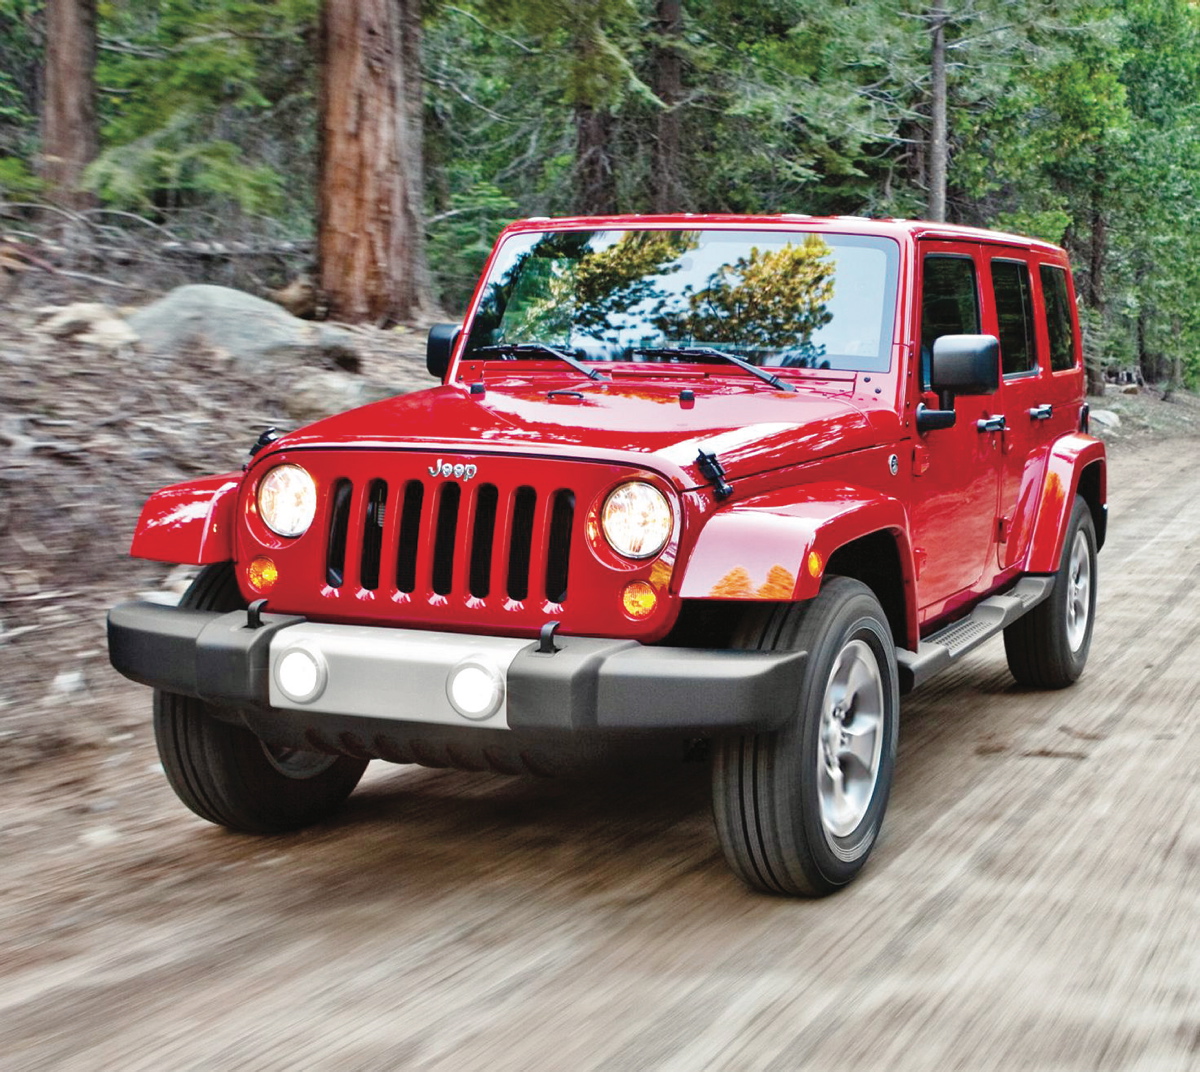 Review: Jeep offers soft ride for city slickers - Victoria Times Colonist